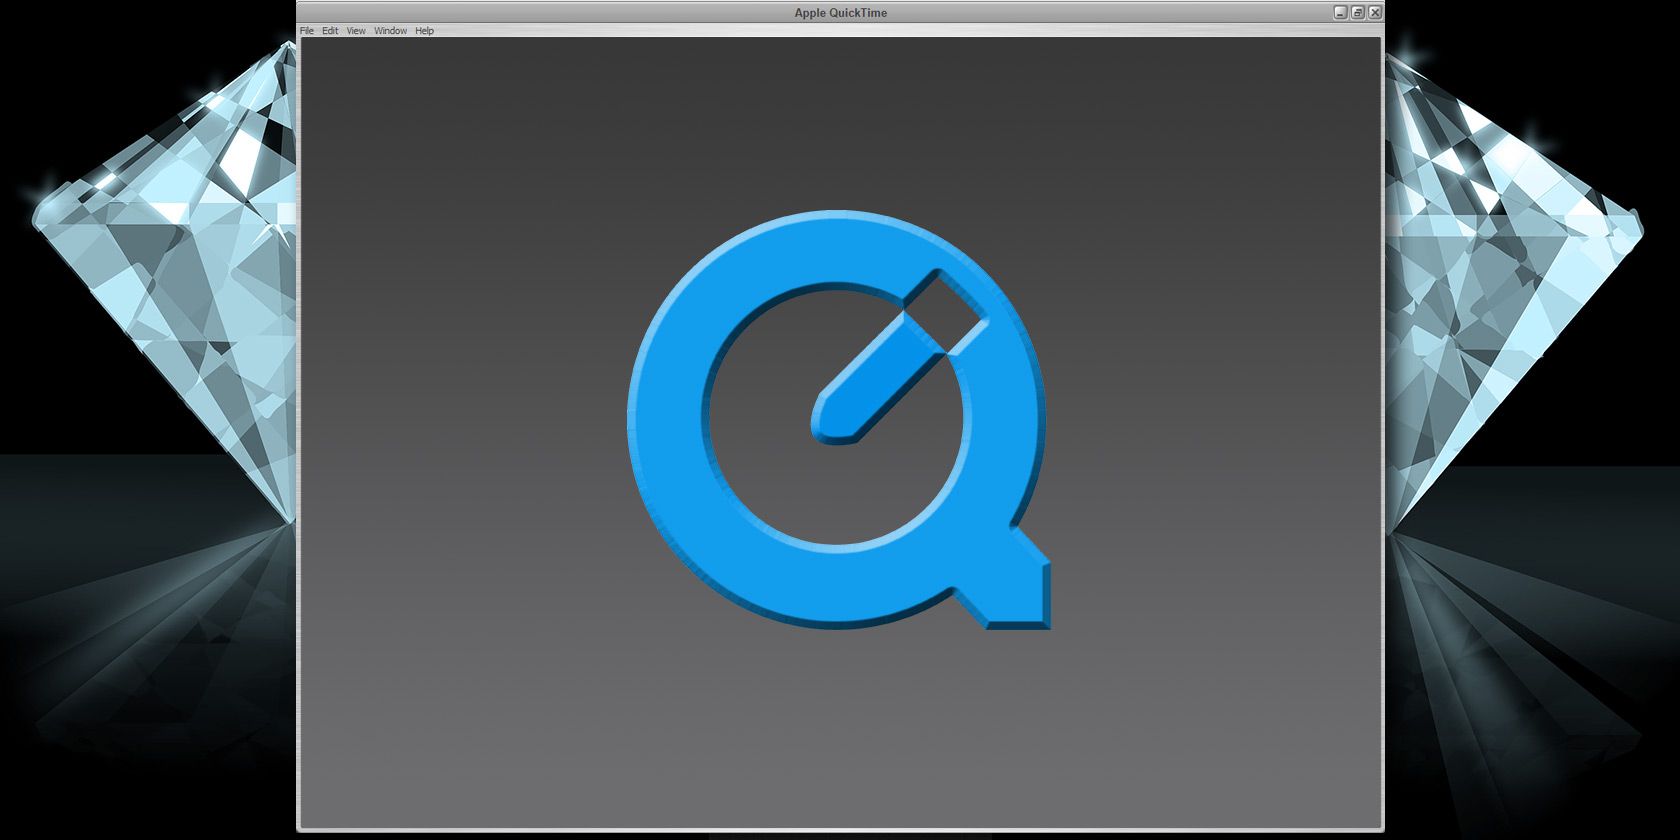 quicktime player version 10 free download